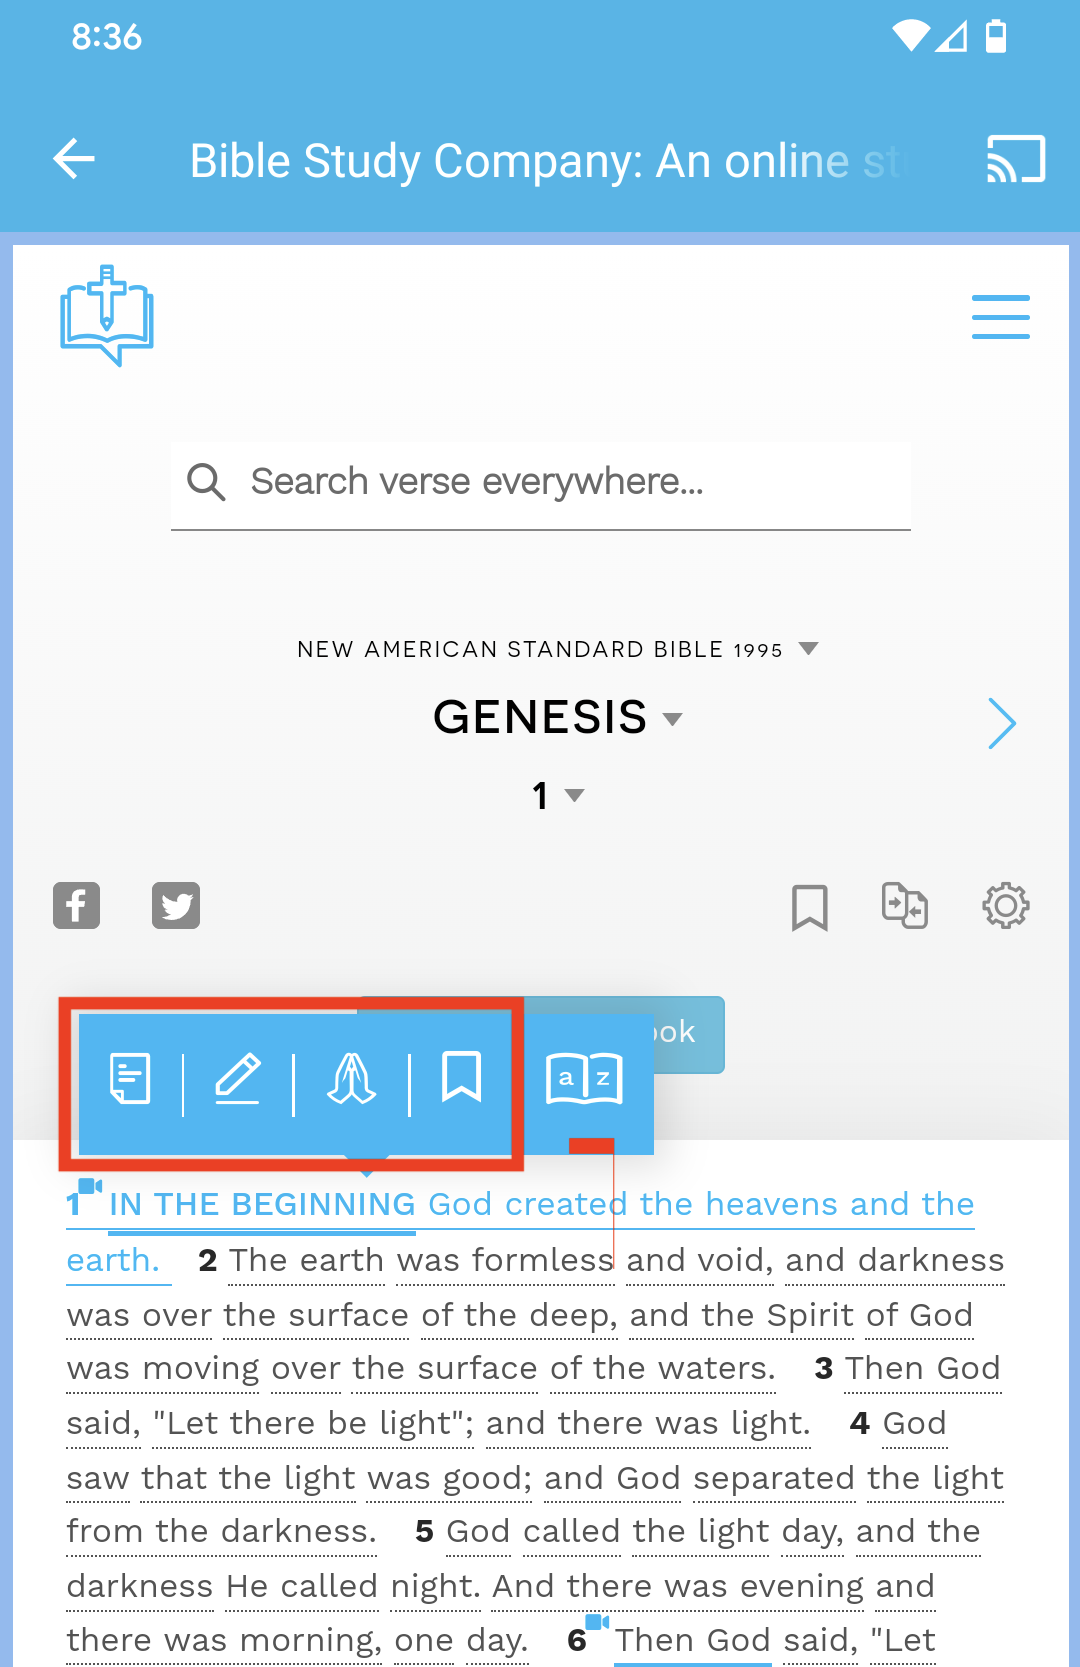 When you click on a verse use the reader, the first 4 icons are actions that require an account